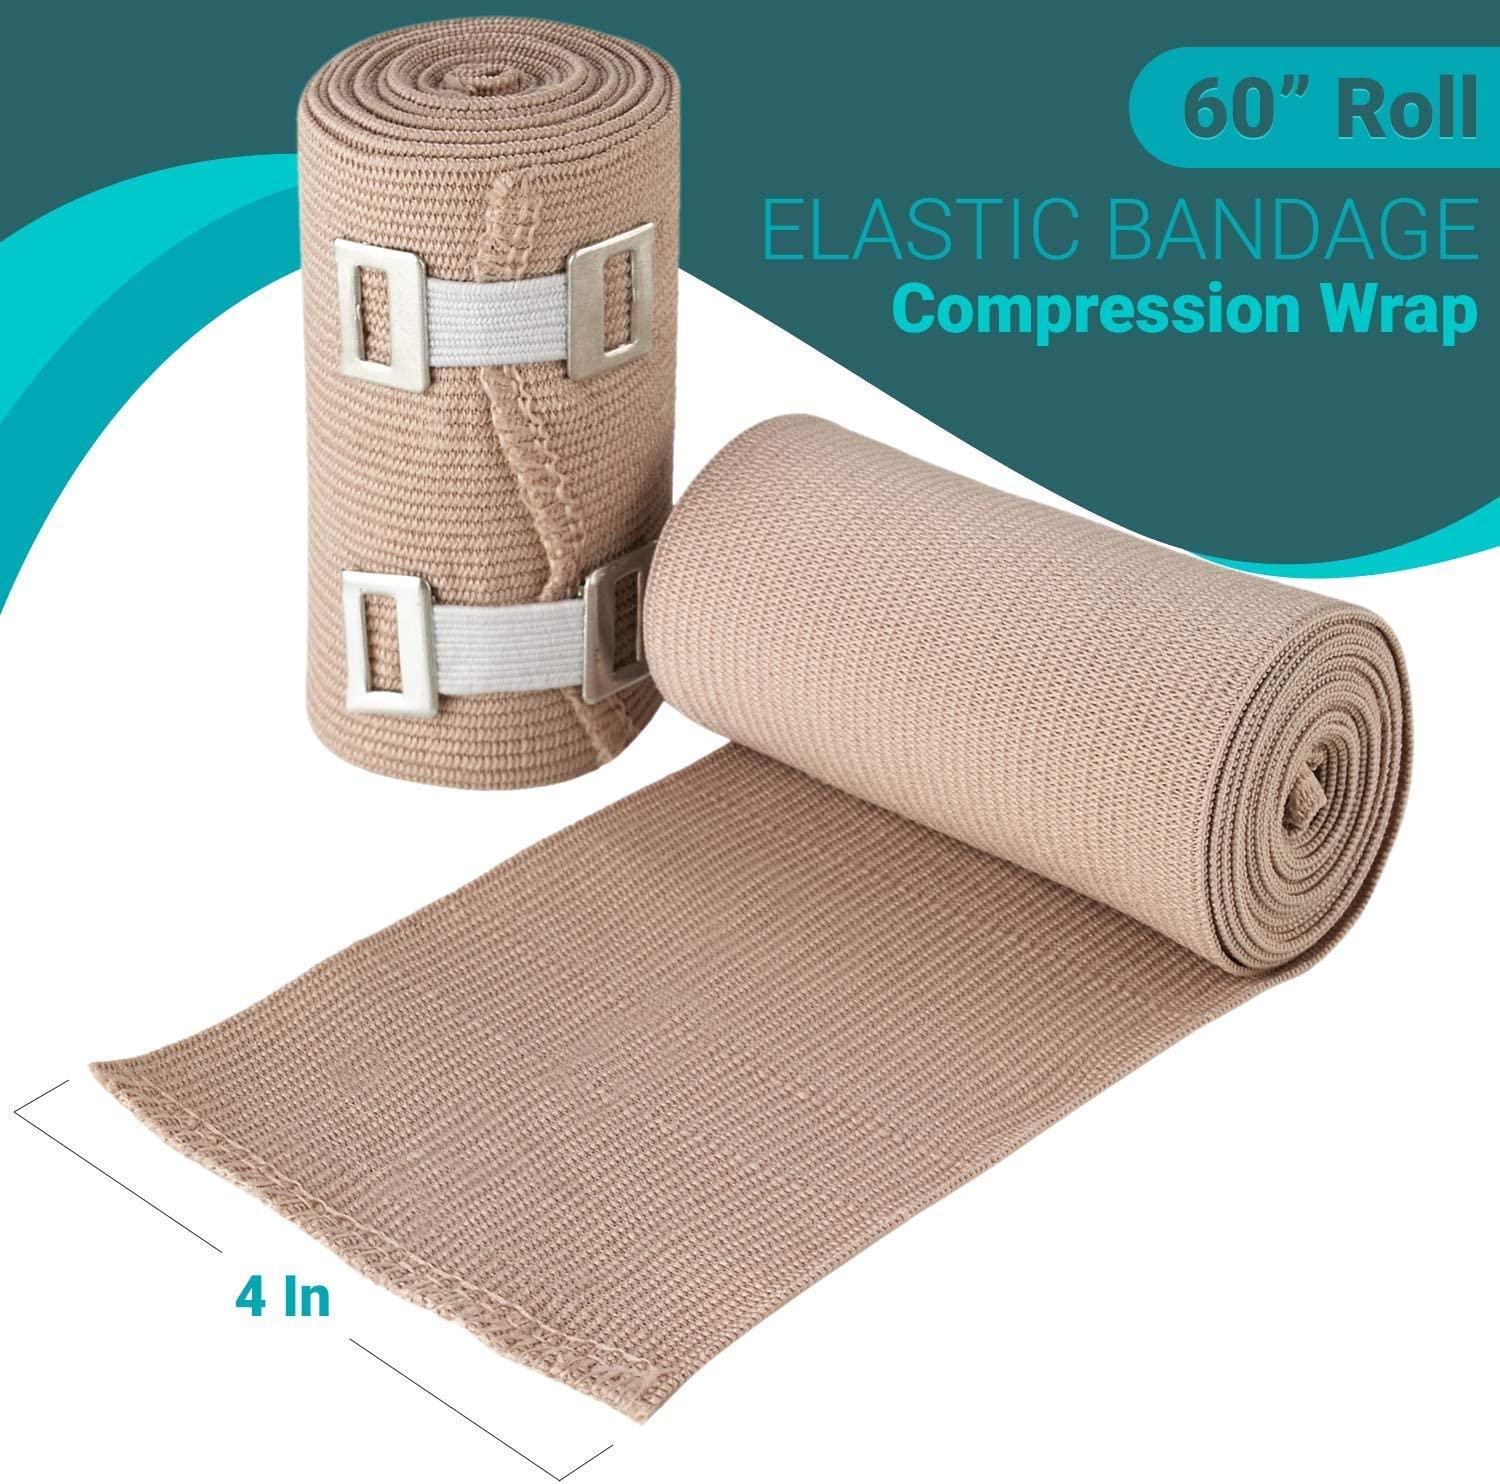 Elastic Compression Bandage Wrap - Premium Quality (Set of 4) with Hooks,  Athletic Sport Support Tape Rolls for Ankle, Wrist, Arm, Leg Sprains